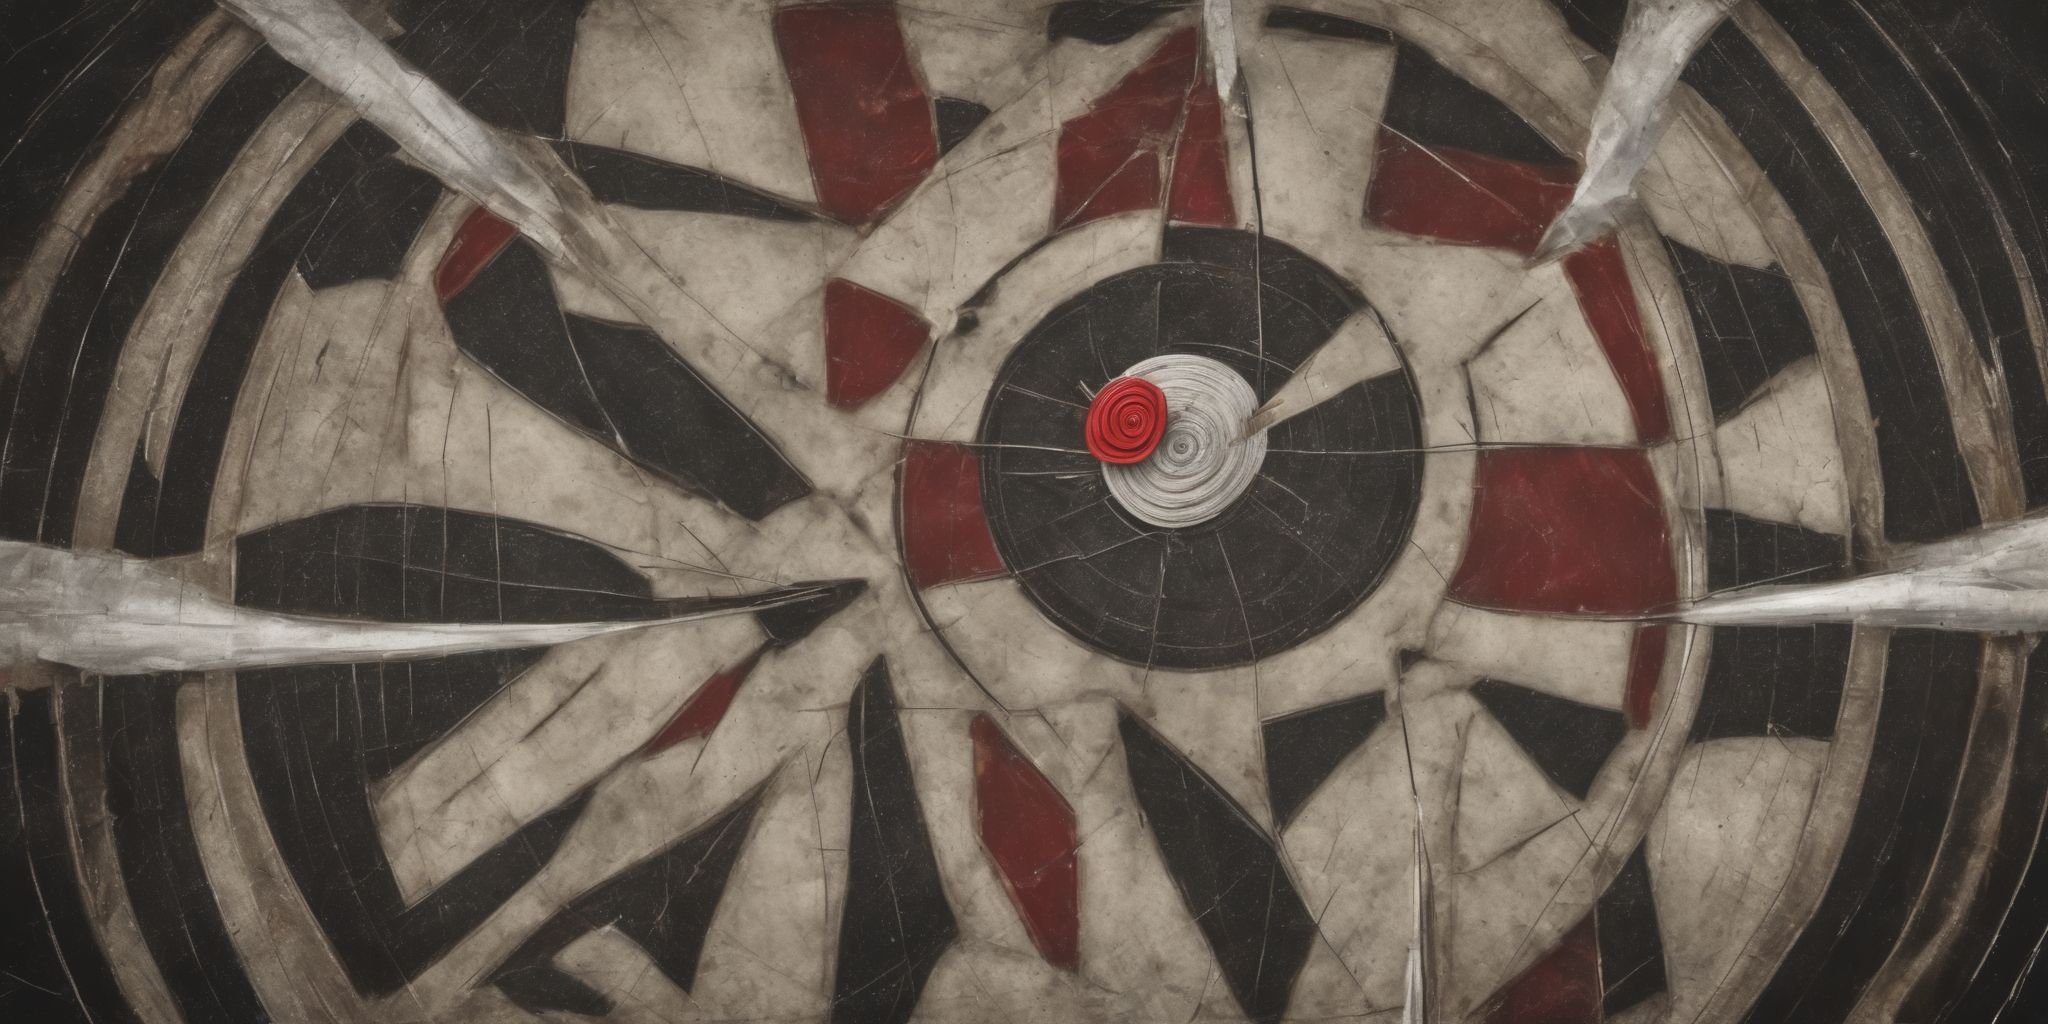 Bulls-eye  in realistic, photographic style